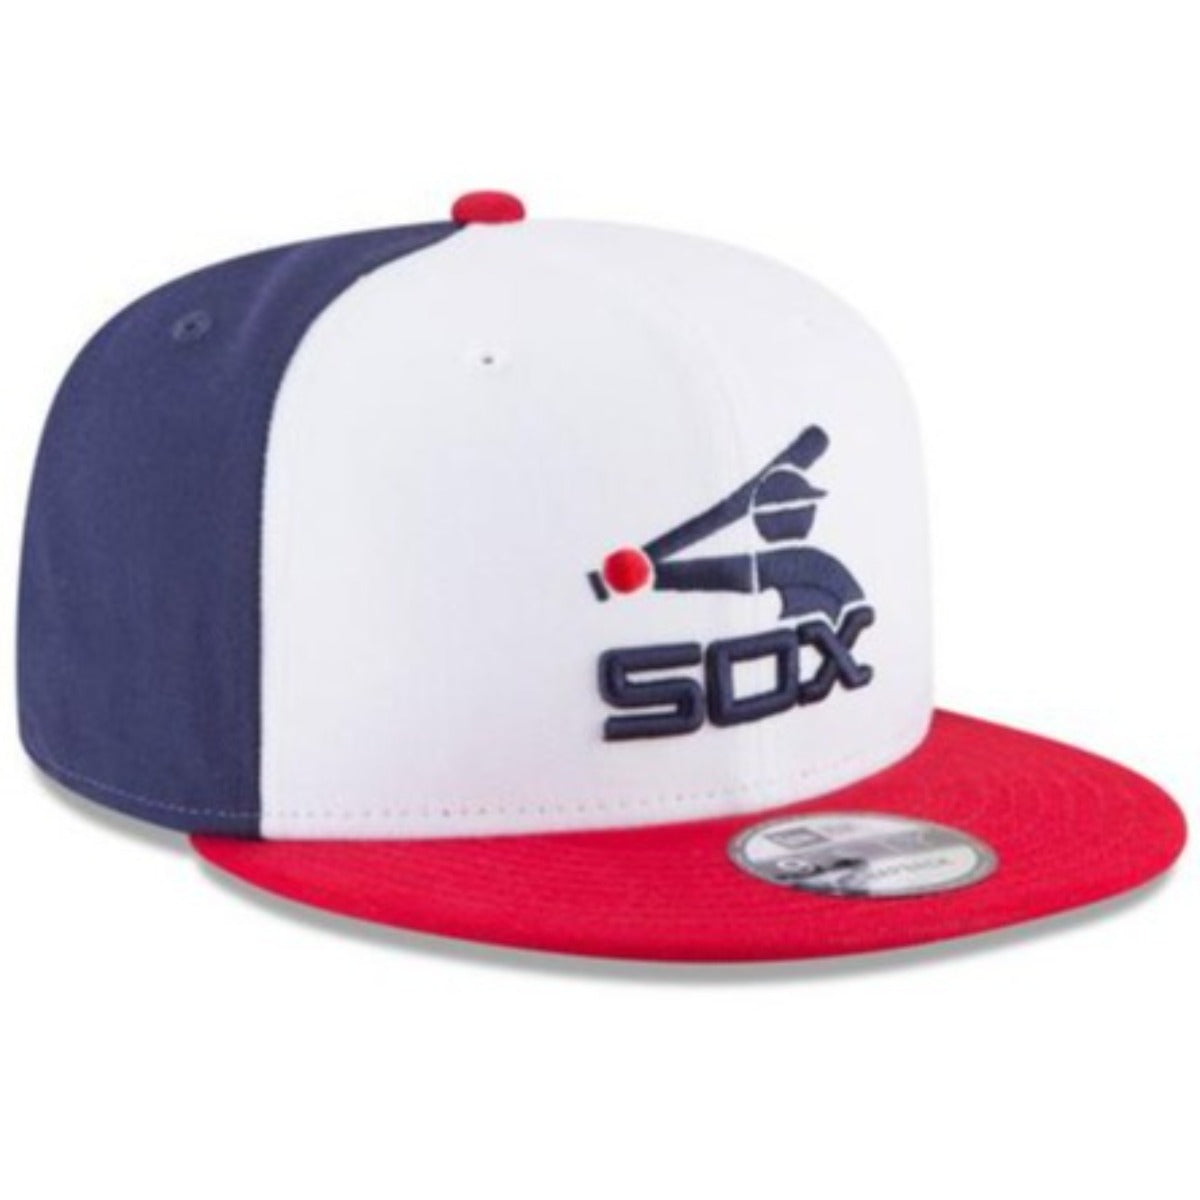 Chicago White Sox Cooper town 9FIFTY -white/royal Nvsoccer.com Thecoliseum